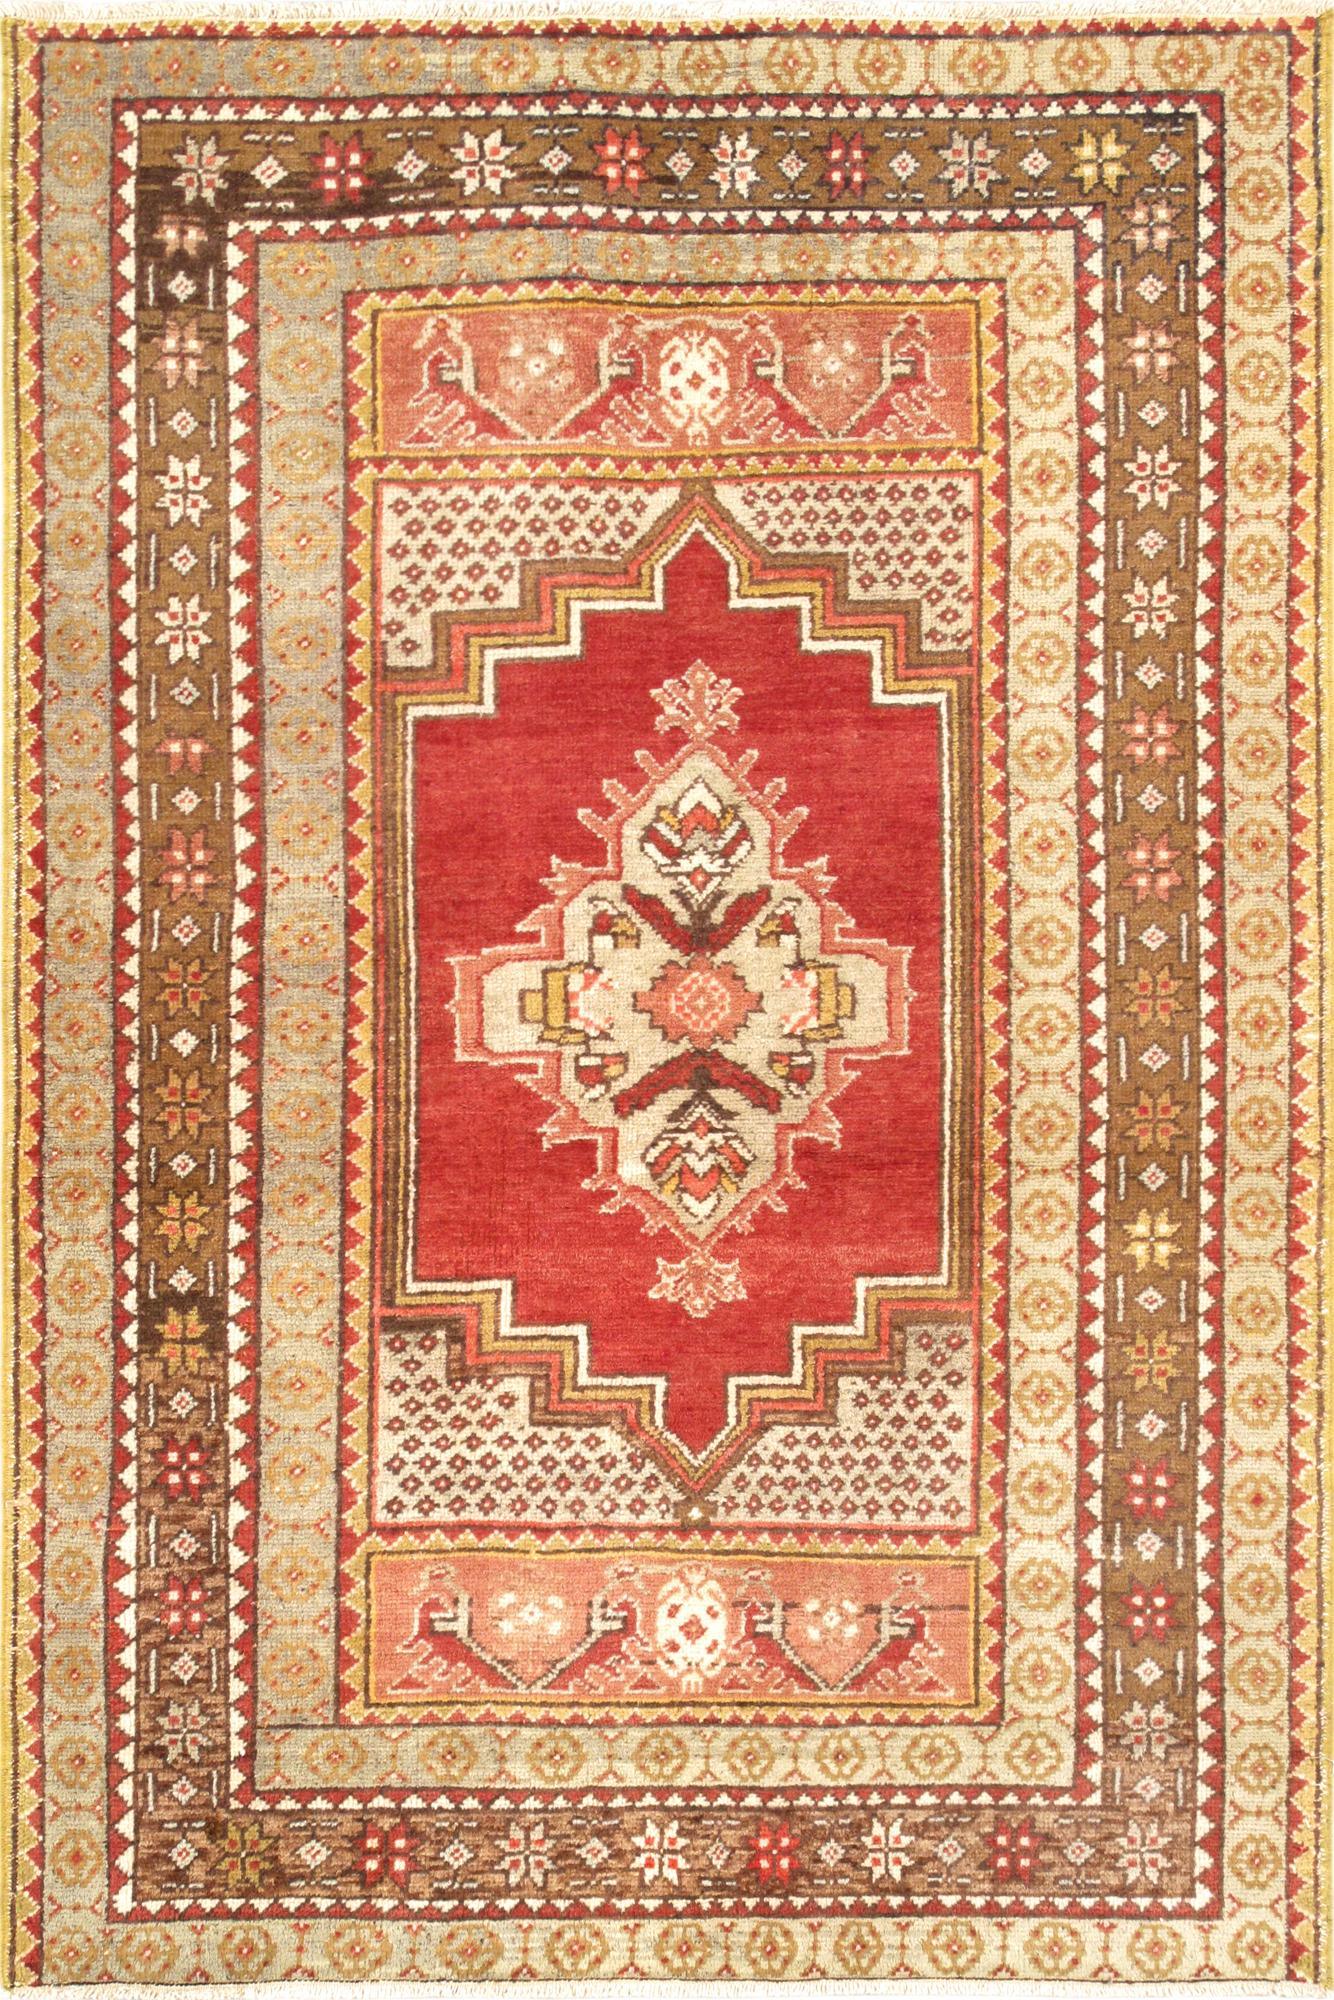 Canvello Vintage Oushak Coral Lamb's Wool Area Rug- 3'8" X 5'7"